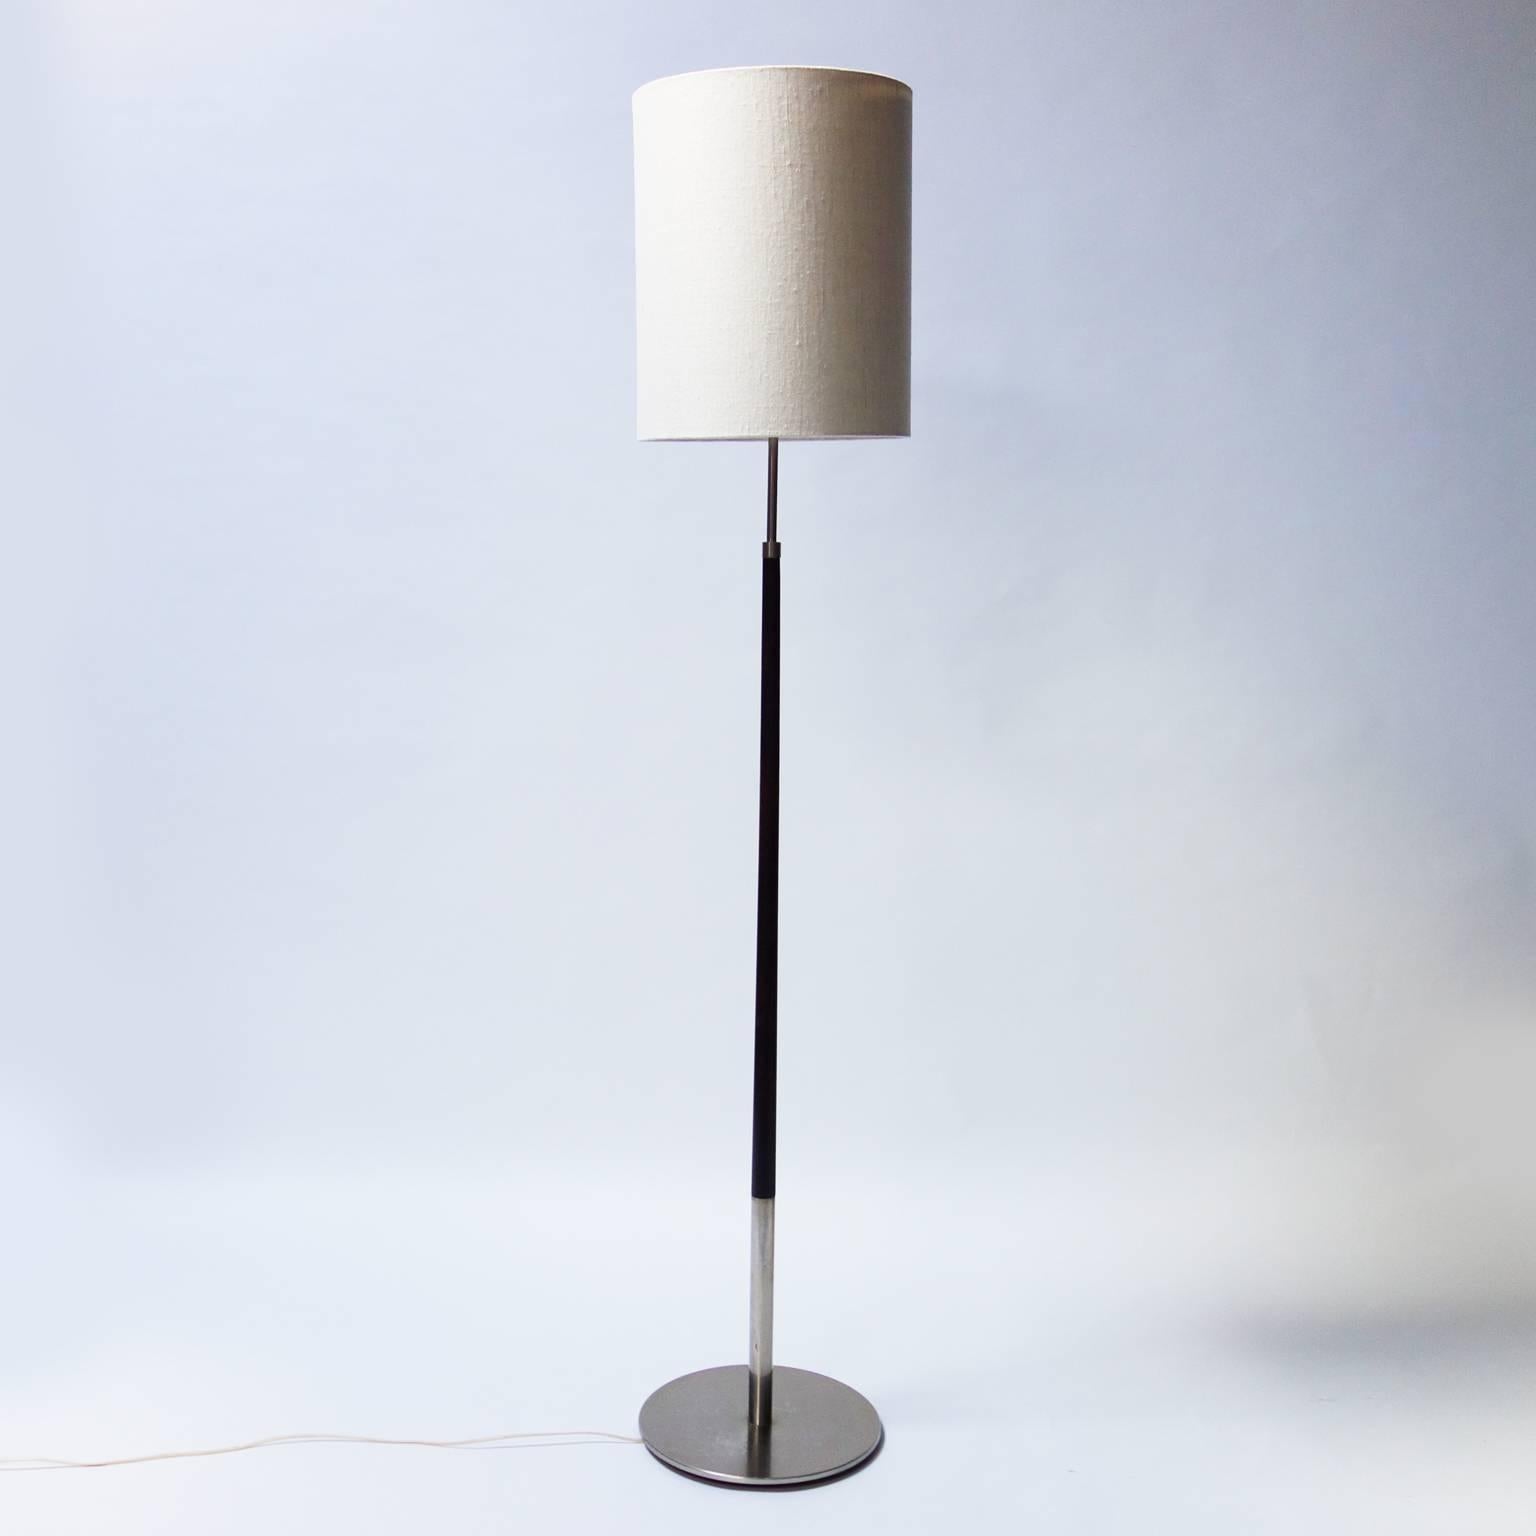 Elegant steel and rosewood floor lamp.
Polished steel base, rosewood stem. New lampshade made of texture fabric.
Electrical wiring up to European standard, sustain current to 220 volts.
     
   